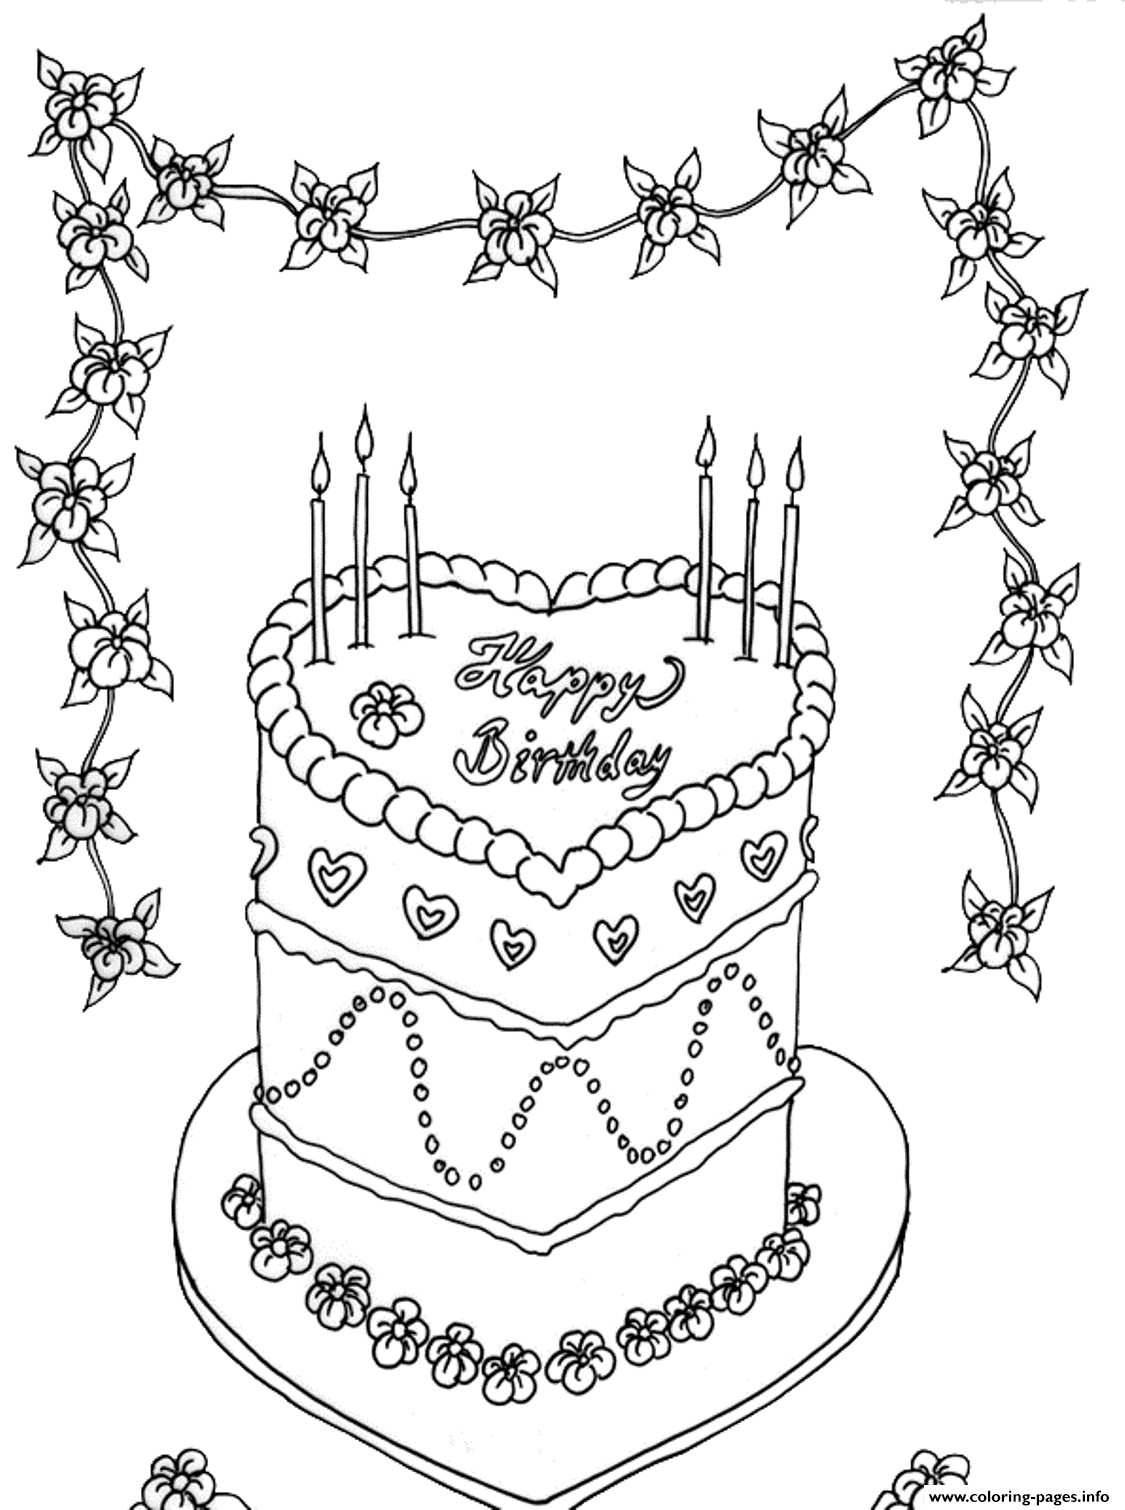 Love Birthday Cake A764 coloring